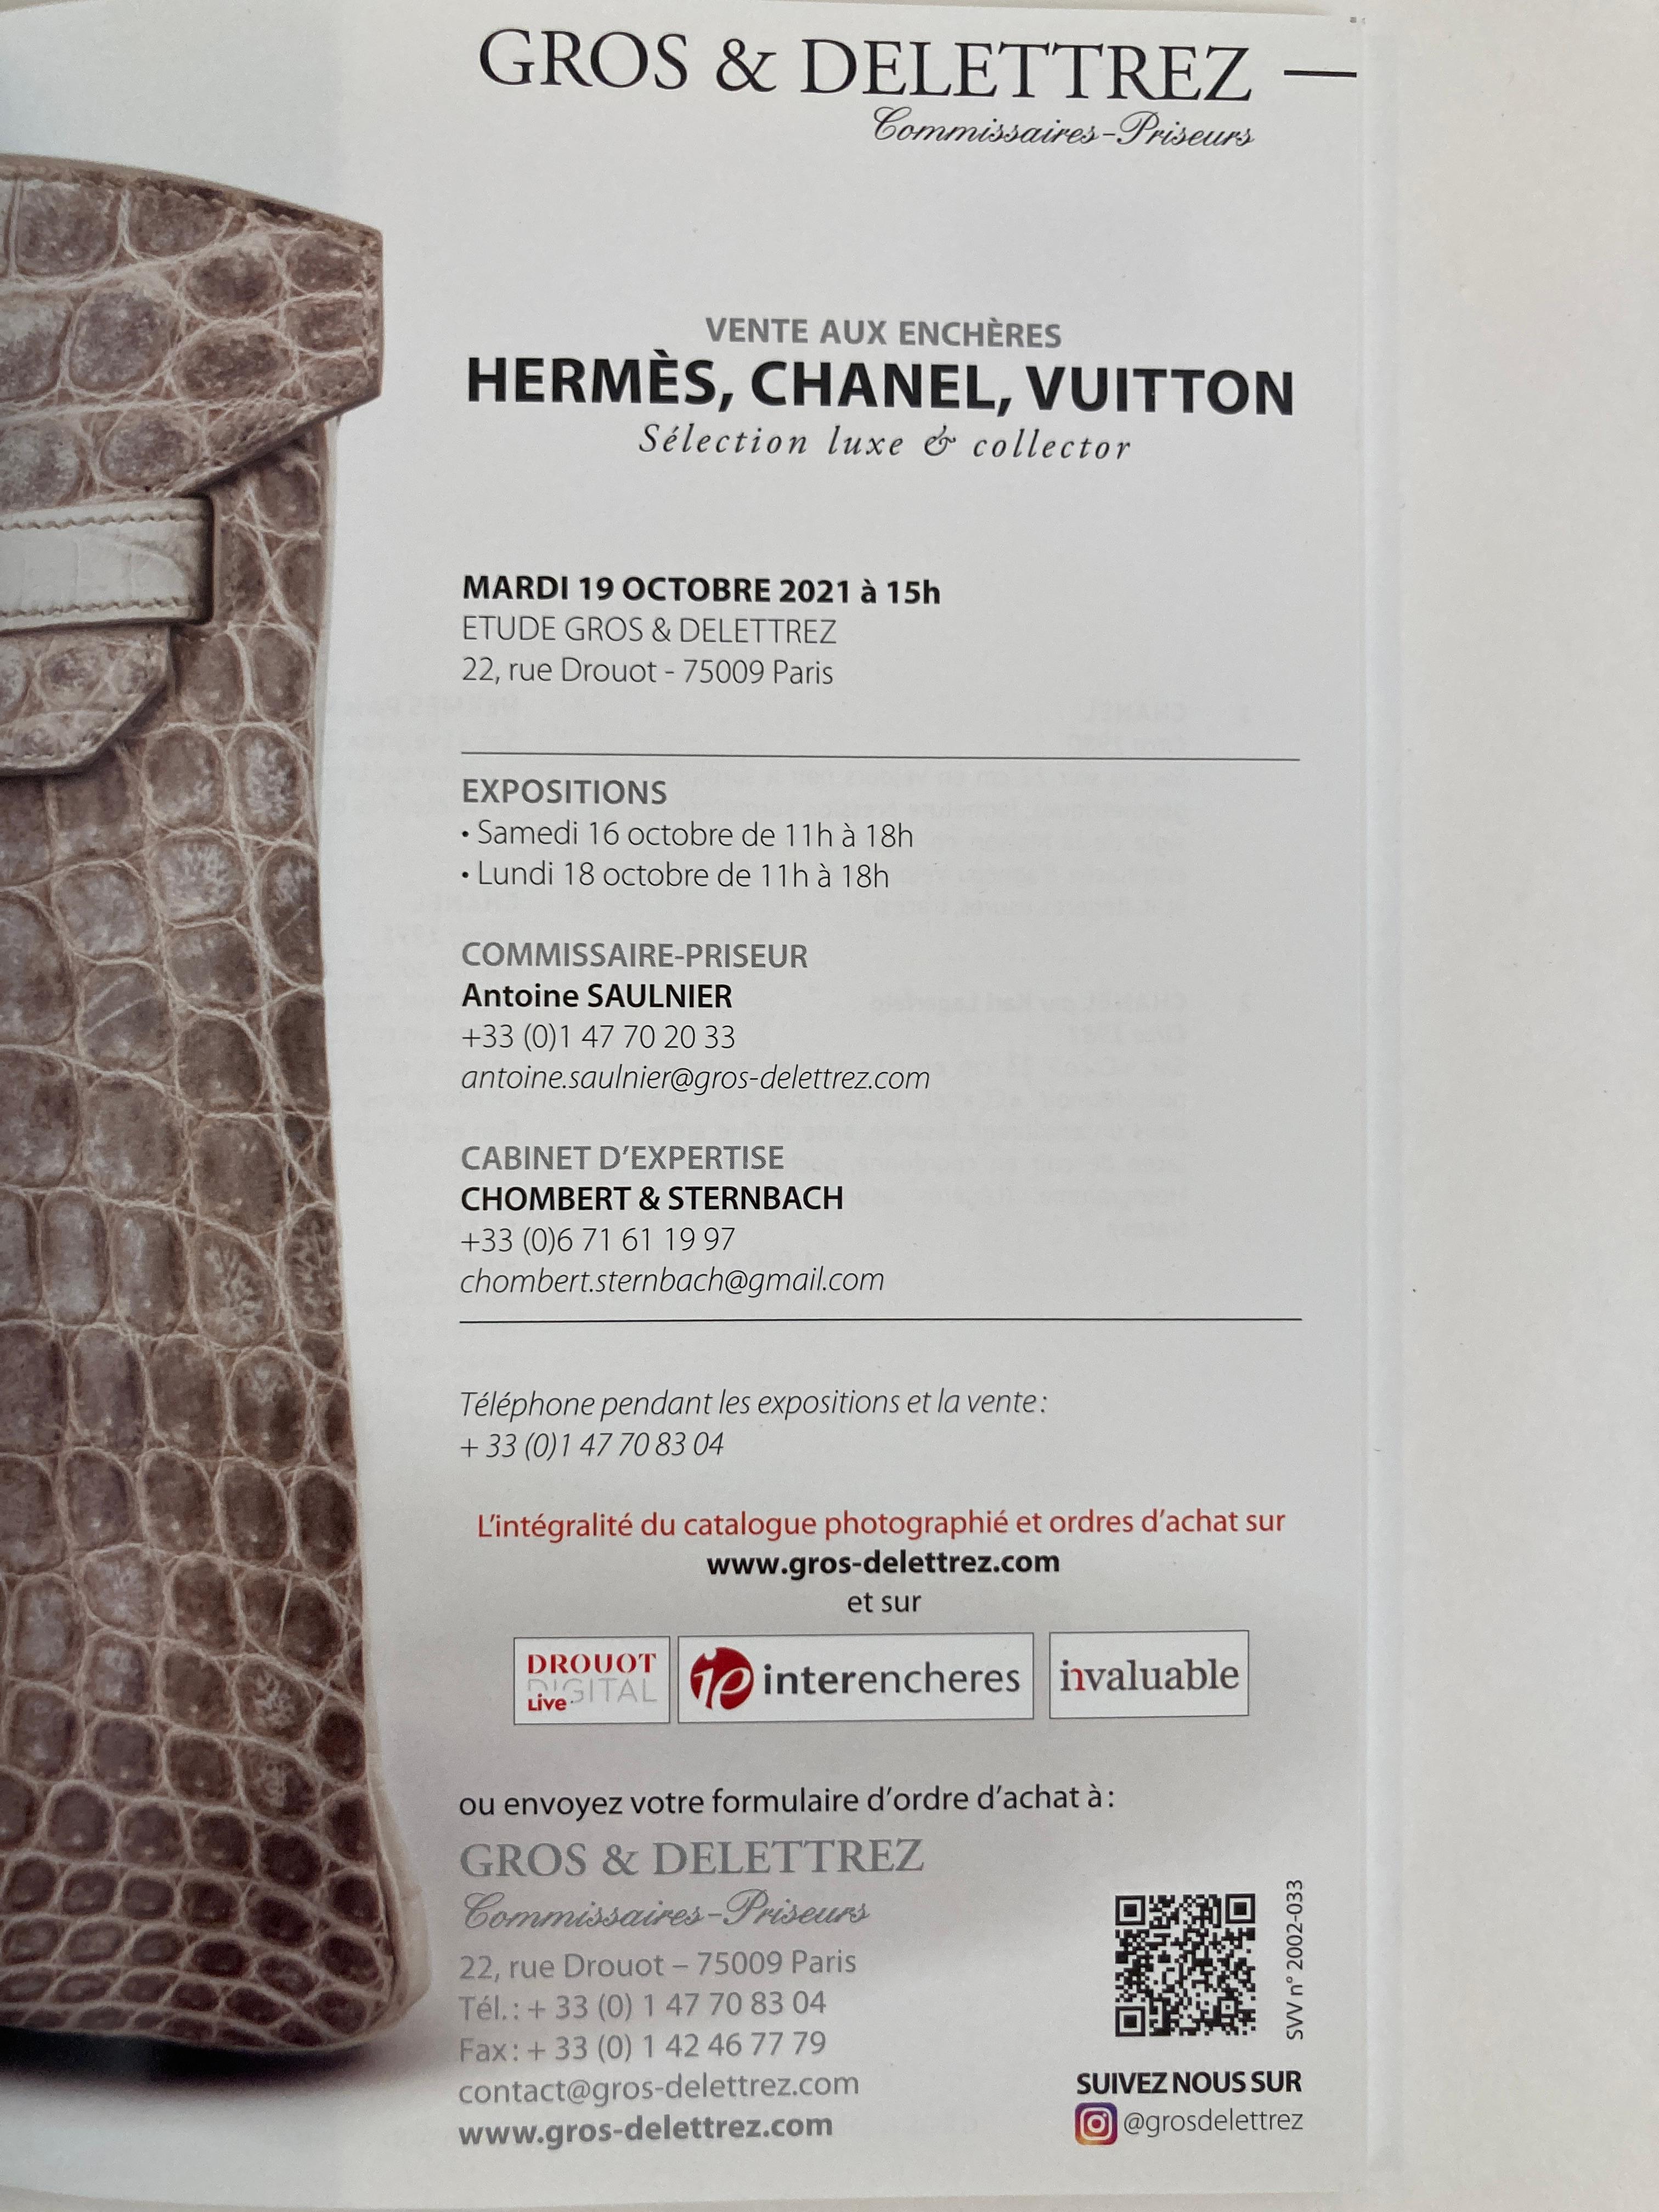 Hermes Chanel Vuitton Luxe Collector Auction Catalog 2021 by Gros & Delettrez In Good Condition For Sale In North Hollywood, CA